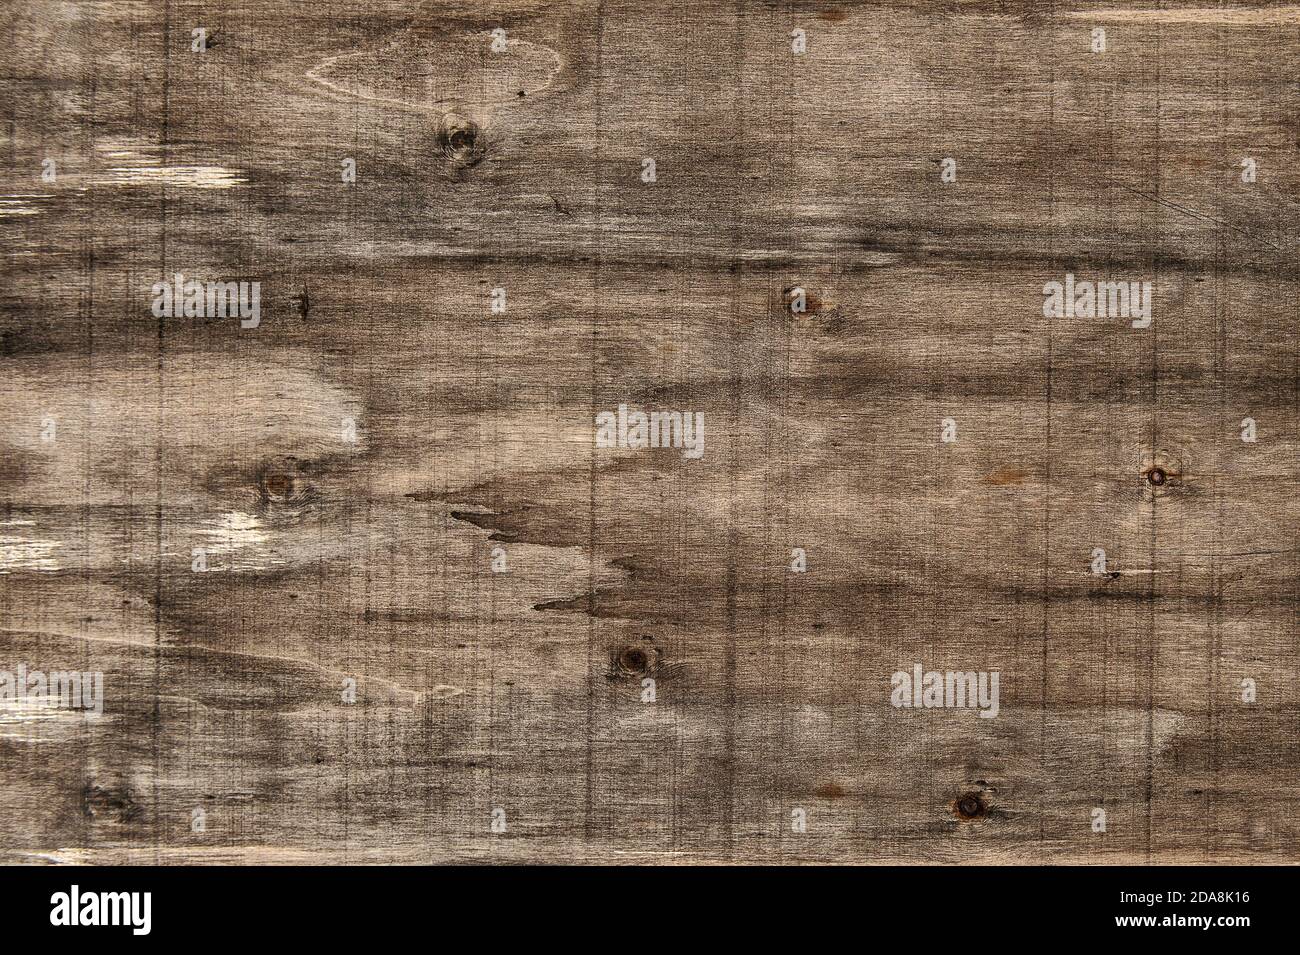 Wooden texture pine wood pattern. Distressed brown background Stock Photo